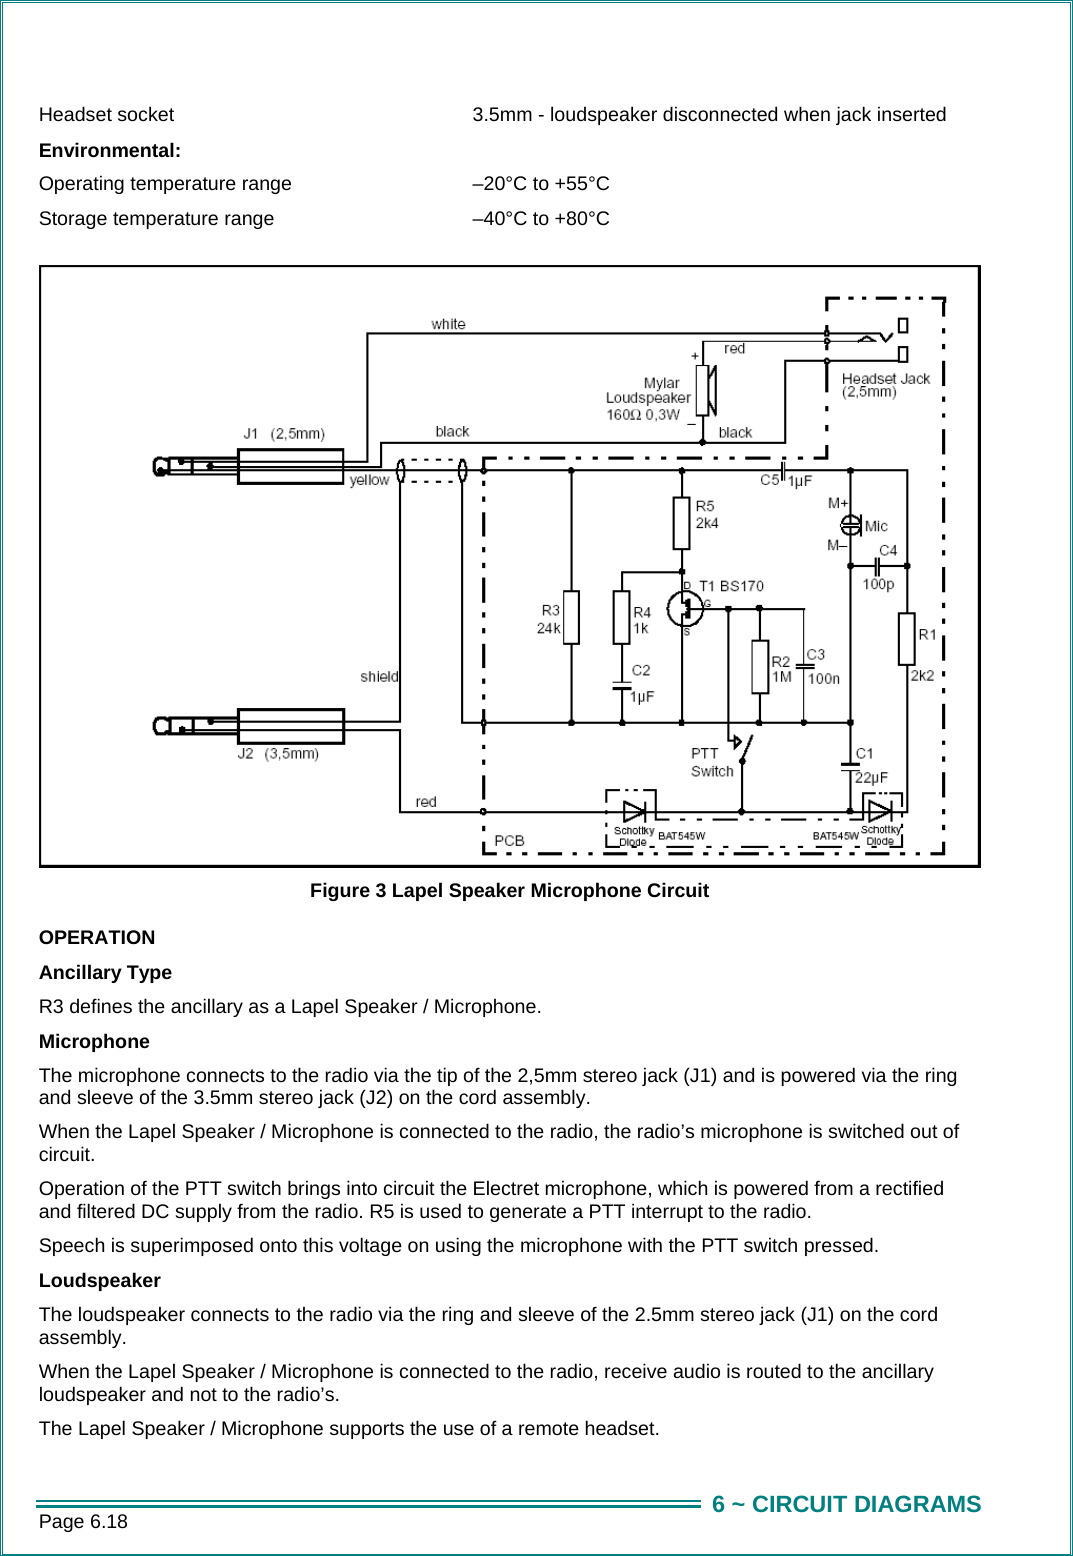 Page 6.18  6 ~ CIRCUIT DIAGRAMS Headset socket  3.5mm - loudspeaker disconnected when jack inserted Environmental:  Operating temperature range  –20°C to +55°C Storage temperature range  –40°C to +80°C  Figure 3 Lapel Speaker Microphone Circuit OPERATION Ancillary Type R3 defines the ancillary as a Lapel Speaker / Microphone. Microphone The microphone connects to the radio via the tip of the 2,5mm stereo jack (J1) and is powered via the ring and sleeve of the 3.5mm stereo jack (J2) on the cord assembly. When the Lapel Speaker / Microphone is connected to the radio, the radio’s microphone is switched out of circuit. Operation of the PTT switch brings into circuit the Electret microphone, which is powered from a rectified and filtered DC supply from the radio. R5 is used to generate a PTT interrupt to the radio. Speech is superimposed onto this voltage on using the microphone with the PTT switch pressed. Loudspeaker The loudspeaker connects to the radio via the ring and sleeve of the 2.5mm stereo jack (J1) on the cord assembly. When the Lapel Speaker / Microphone is connected to the radio, receive audio is routed to the ancillary loudspeaker and not to the radio’s.  The Lapel Speaker / Microphone supports the use of a remote headset. 